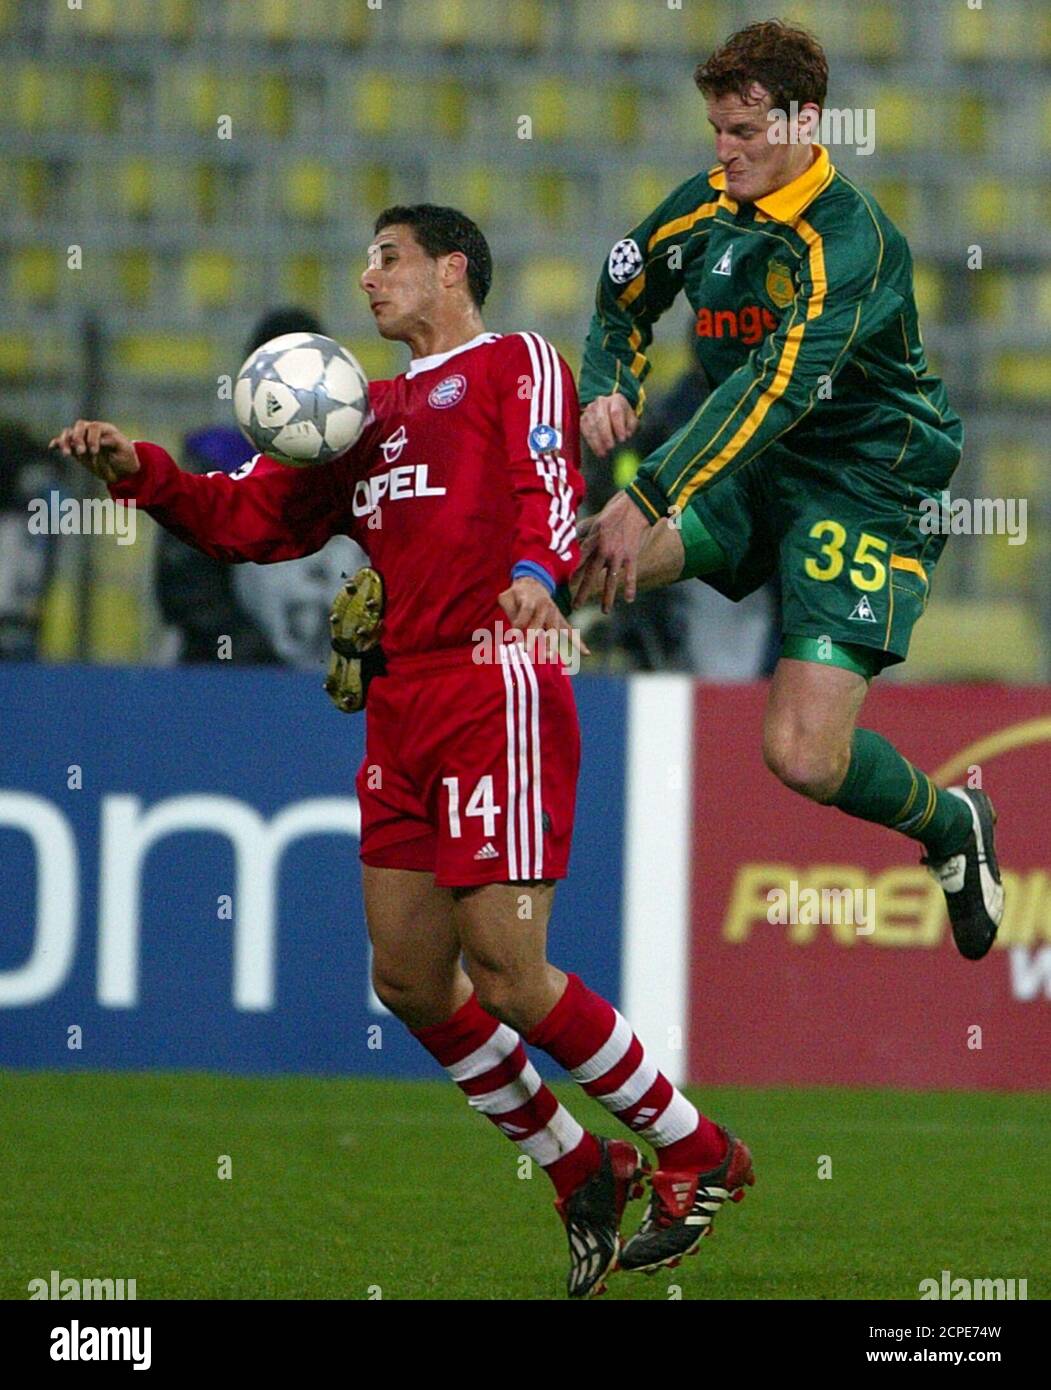 PIZARRO OFGERMAN FIRST DIVISION SOCCER CLUB FC BAYERN MUNICH CHALLENGES CETTO OF FRENCH CLUB FC NANTES ATLANTIQUE DURING CHAMPIONSLEAGUE SOCCER MATCH IN MUNICH.   Claudio Pizarro (L) of German first division soccer club FC Bayern Munich challenges Mauro Cetto of French soccer club FC Nantes Atlantique during the first minutes of their Championsleague group A soccer match in Munich's olympic stadium March 19, 2002. REUTERS/Michael Dalder REUTERS Stock Photo